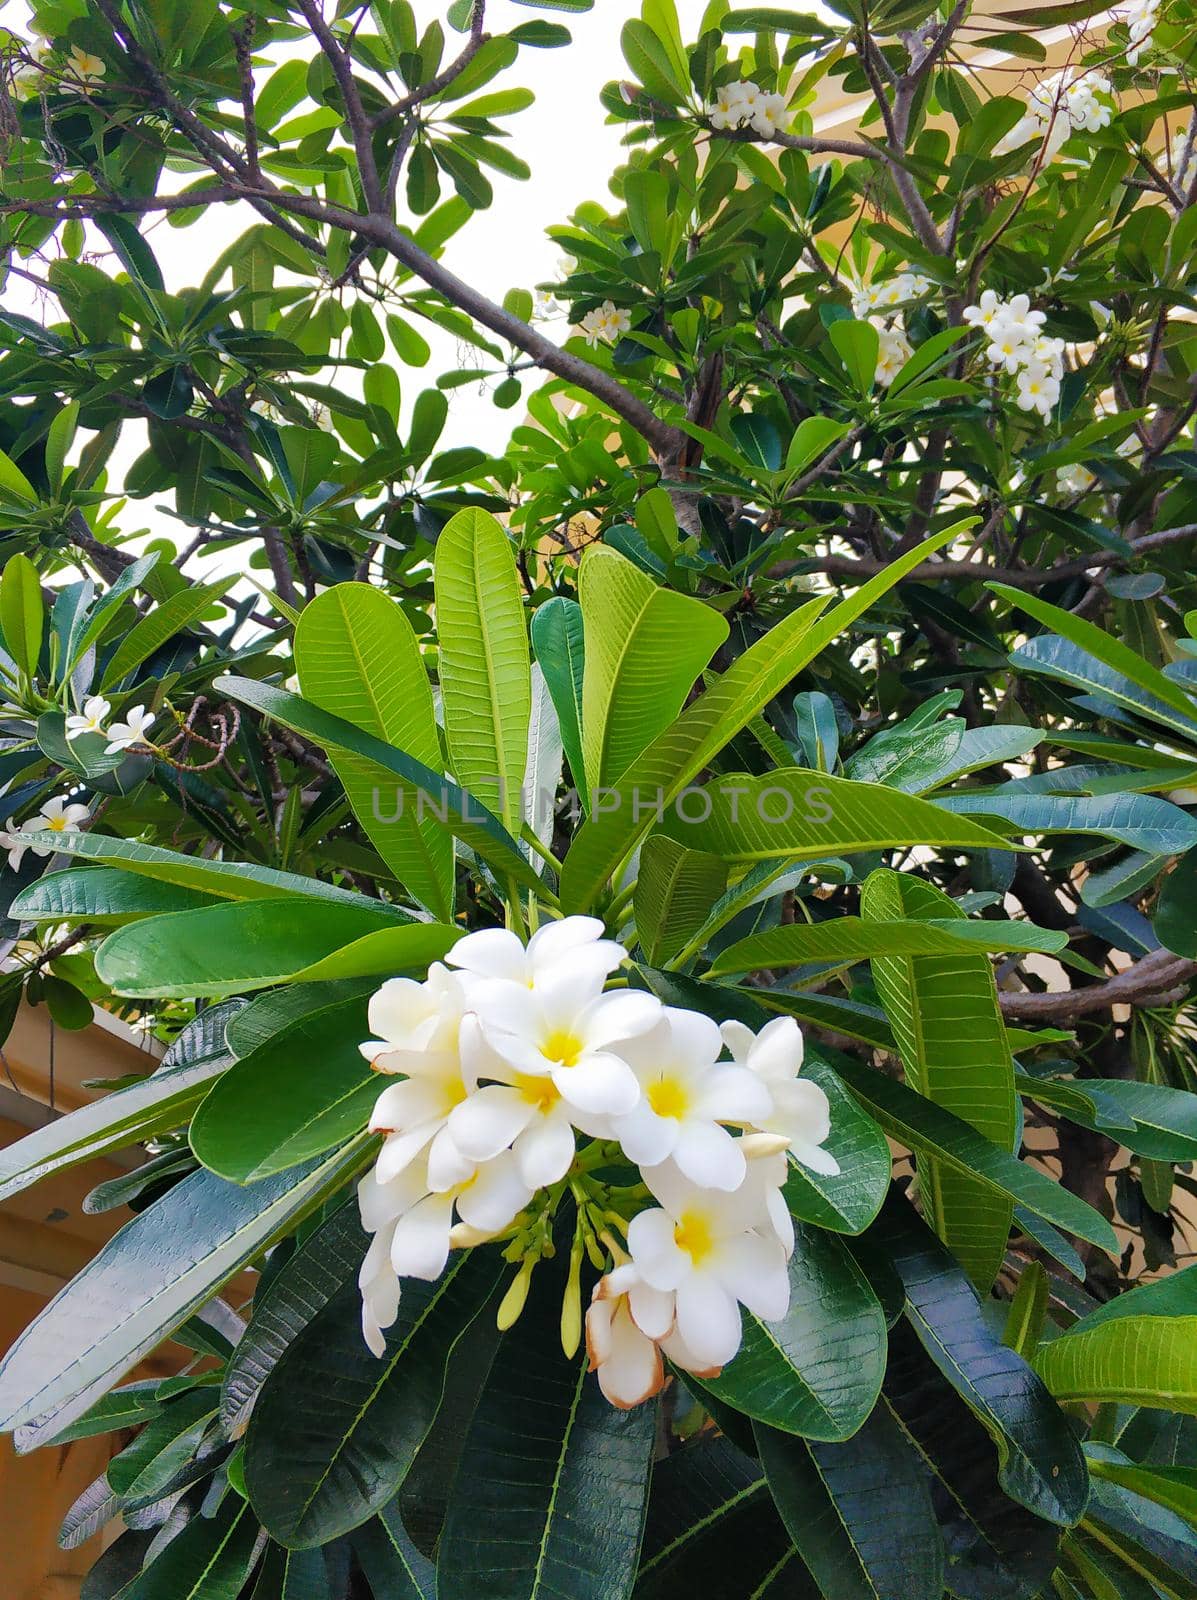 Frangipani tropical flower growing outdoors in thailand.